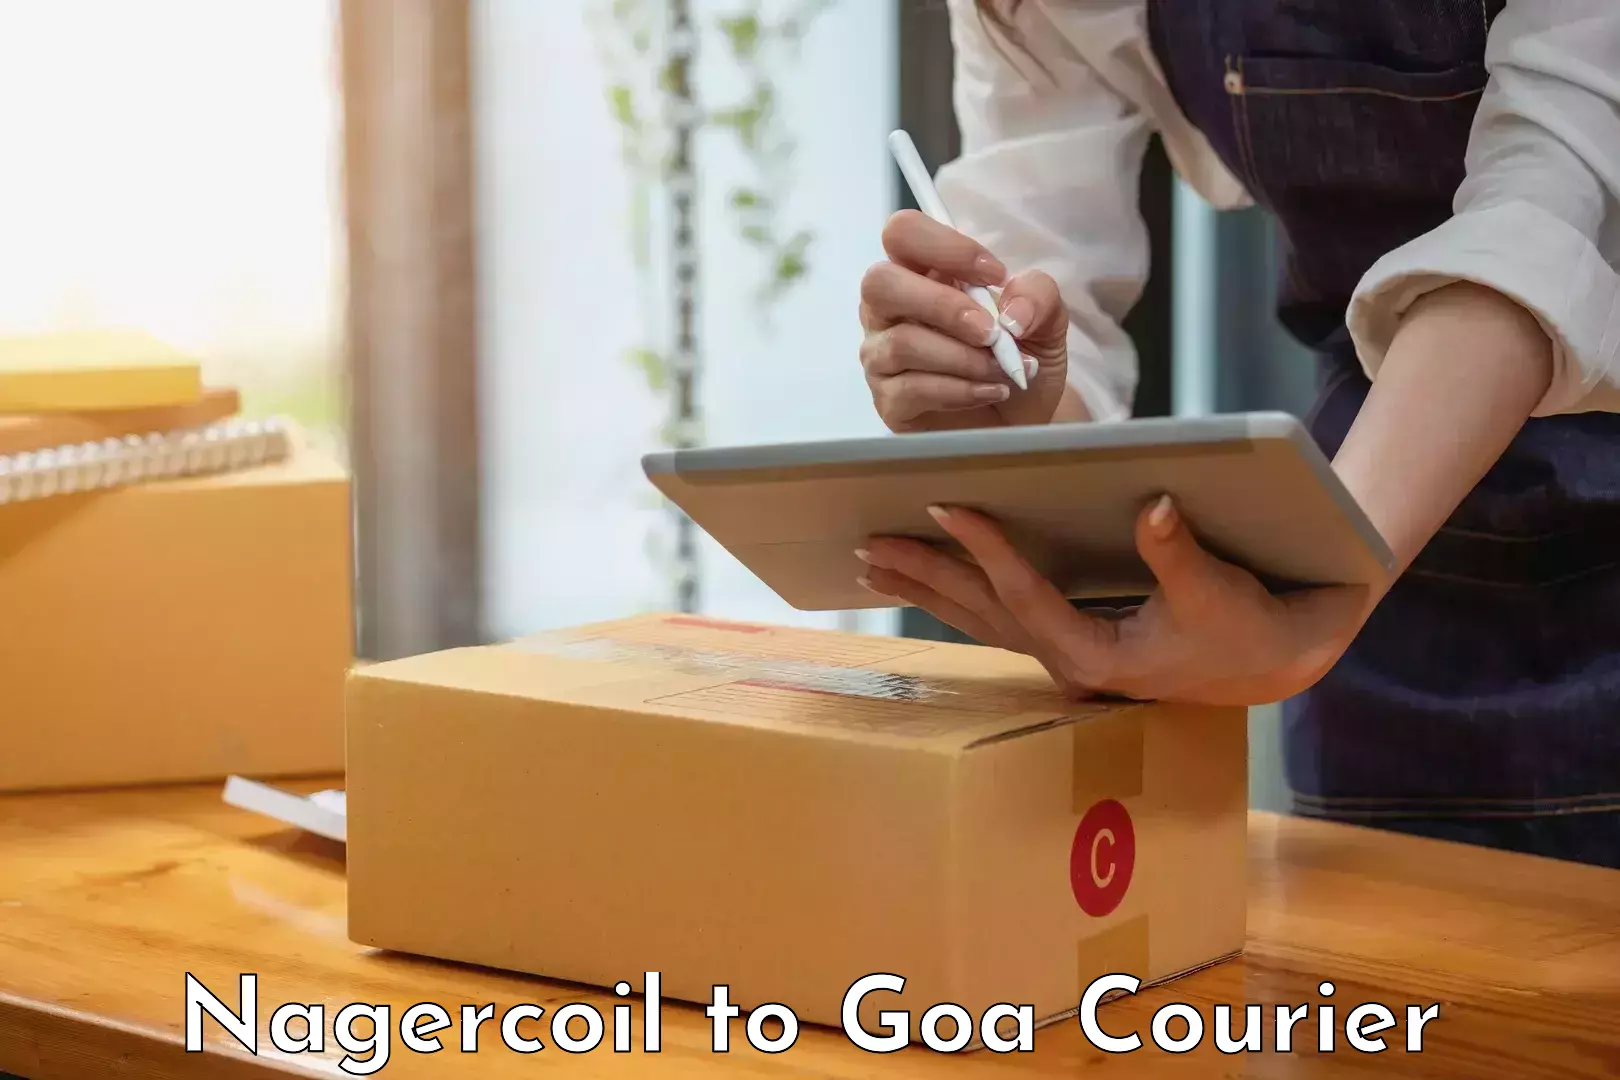 Cost-effective courier options Nagercoil to Panaji